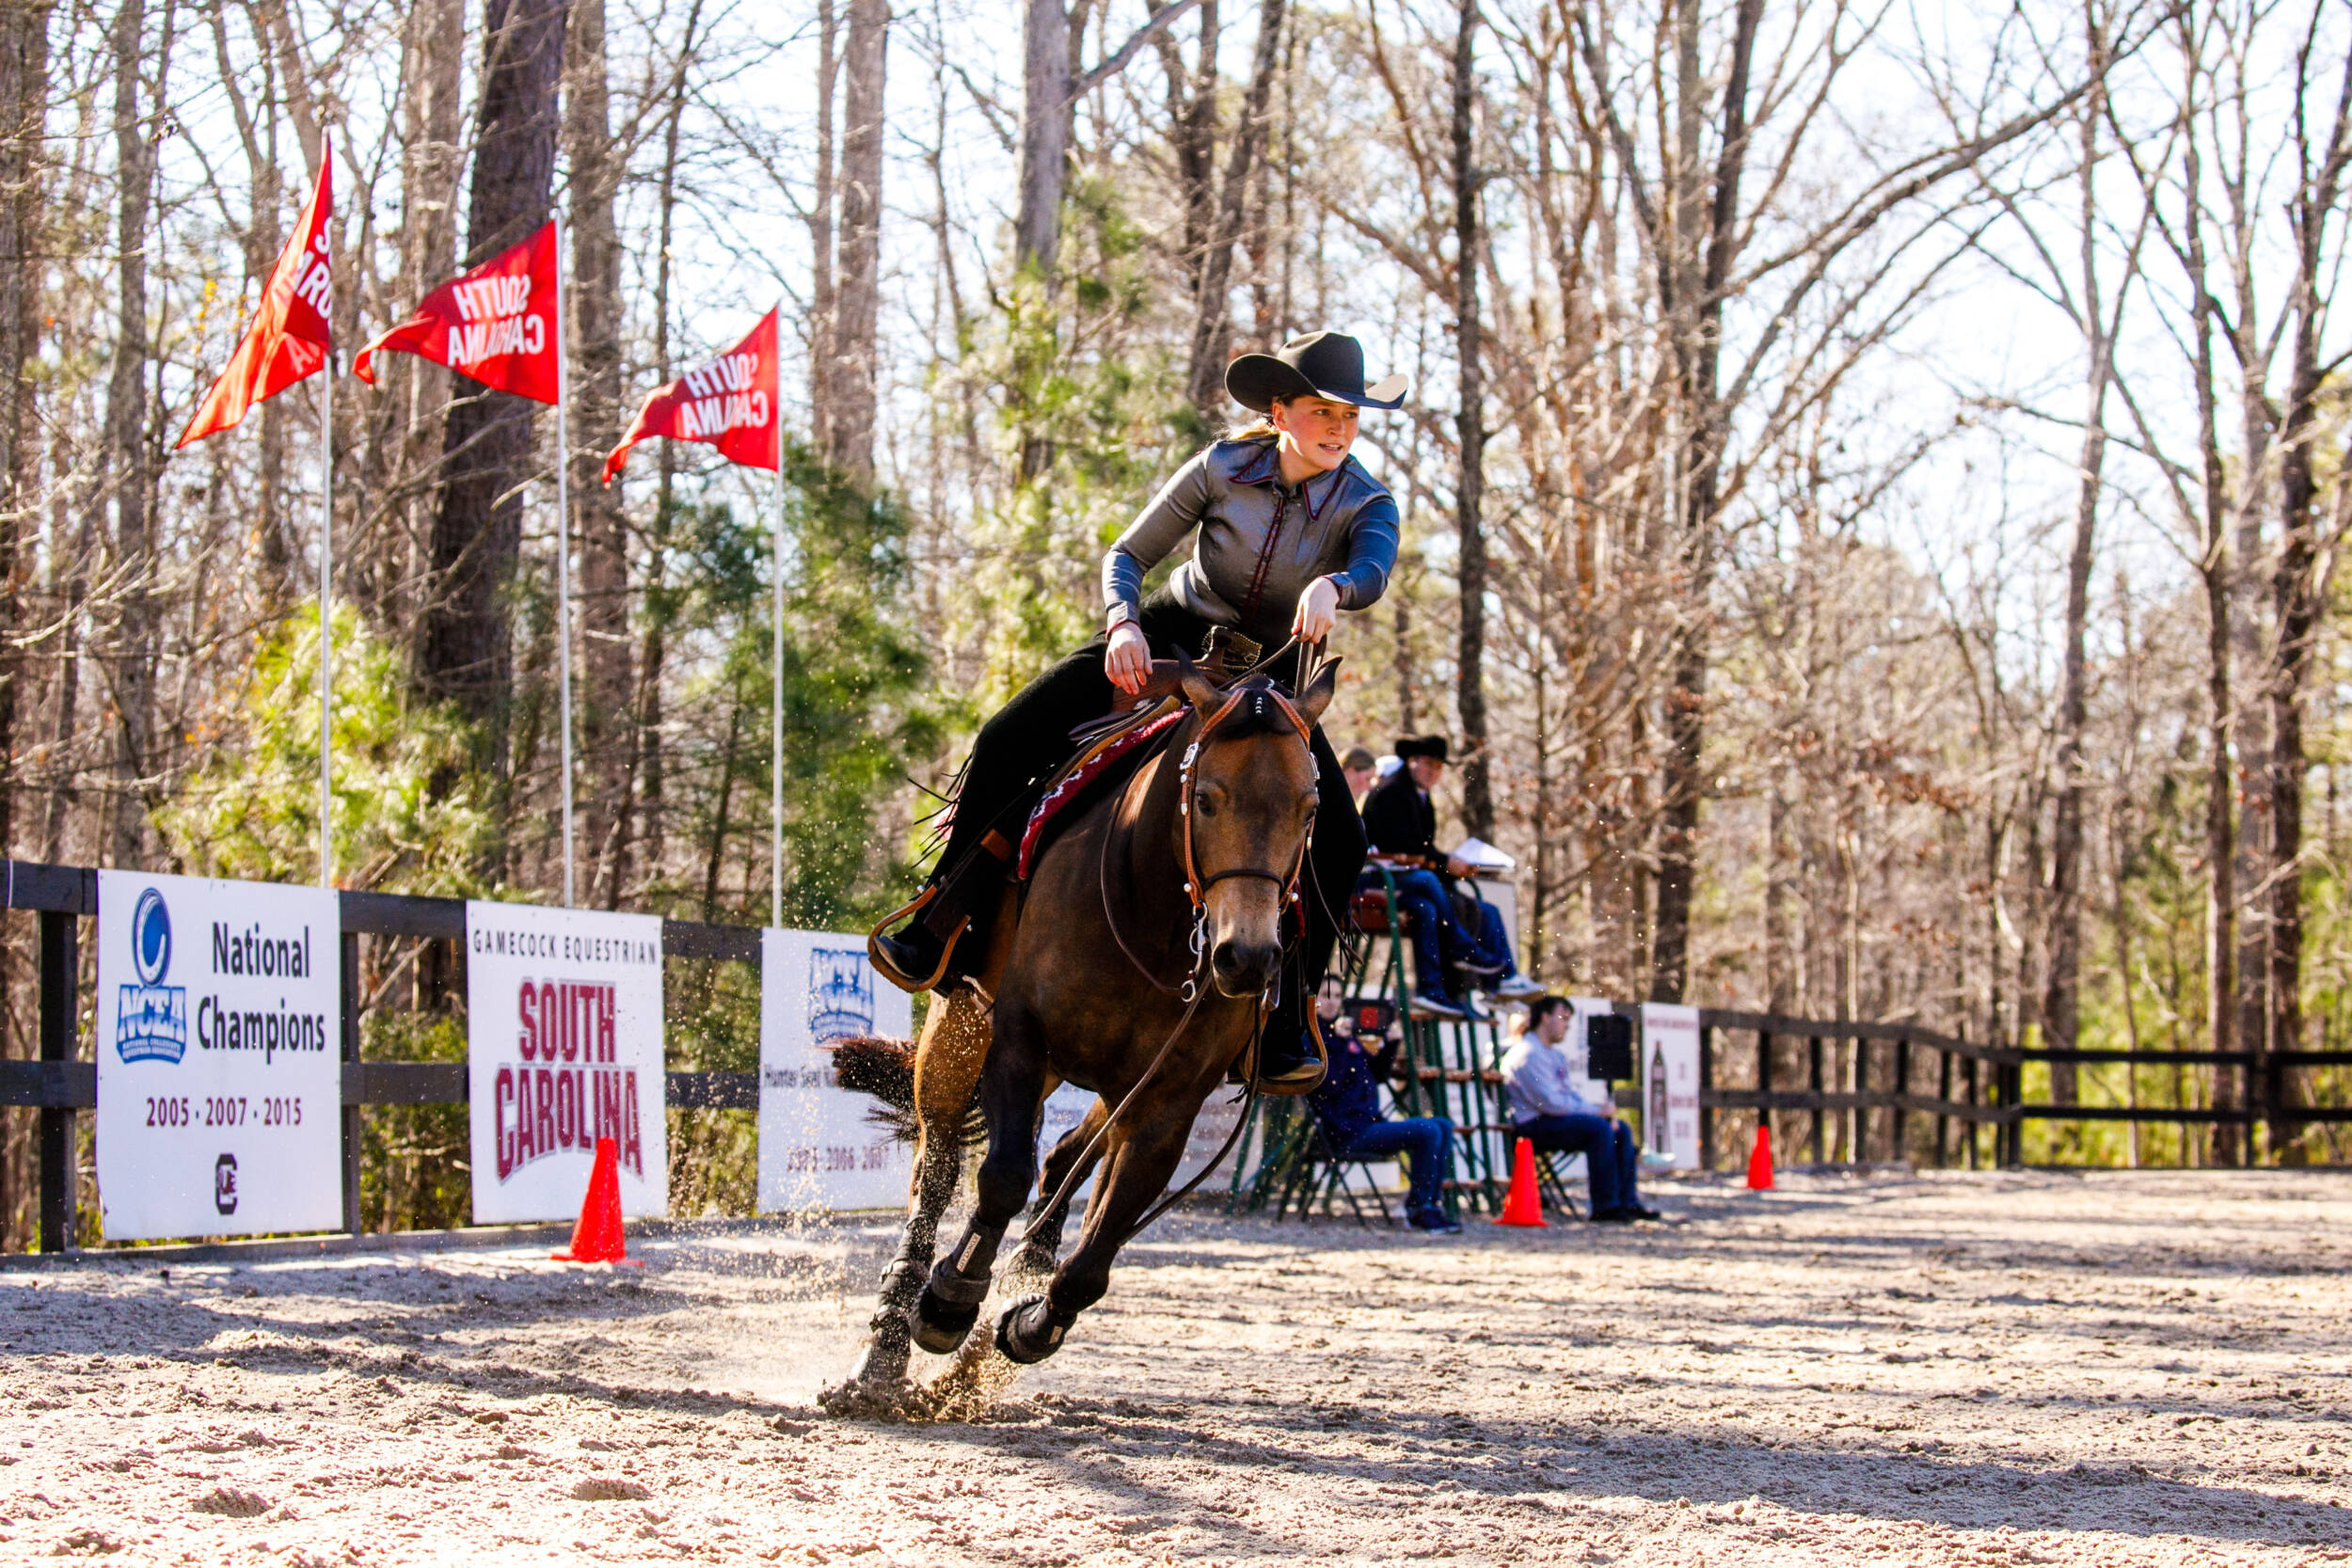 Equestrian to Round Out SEC Play with Top-5 Matchup